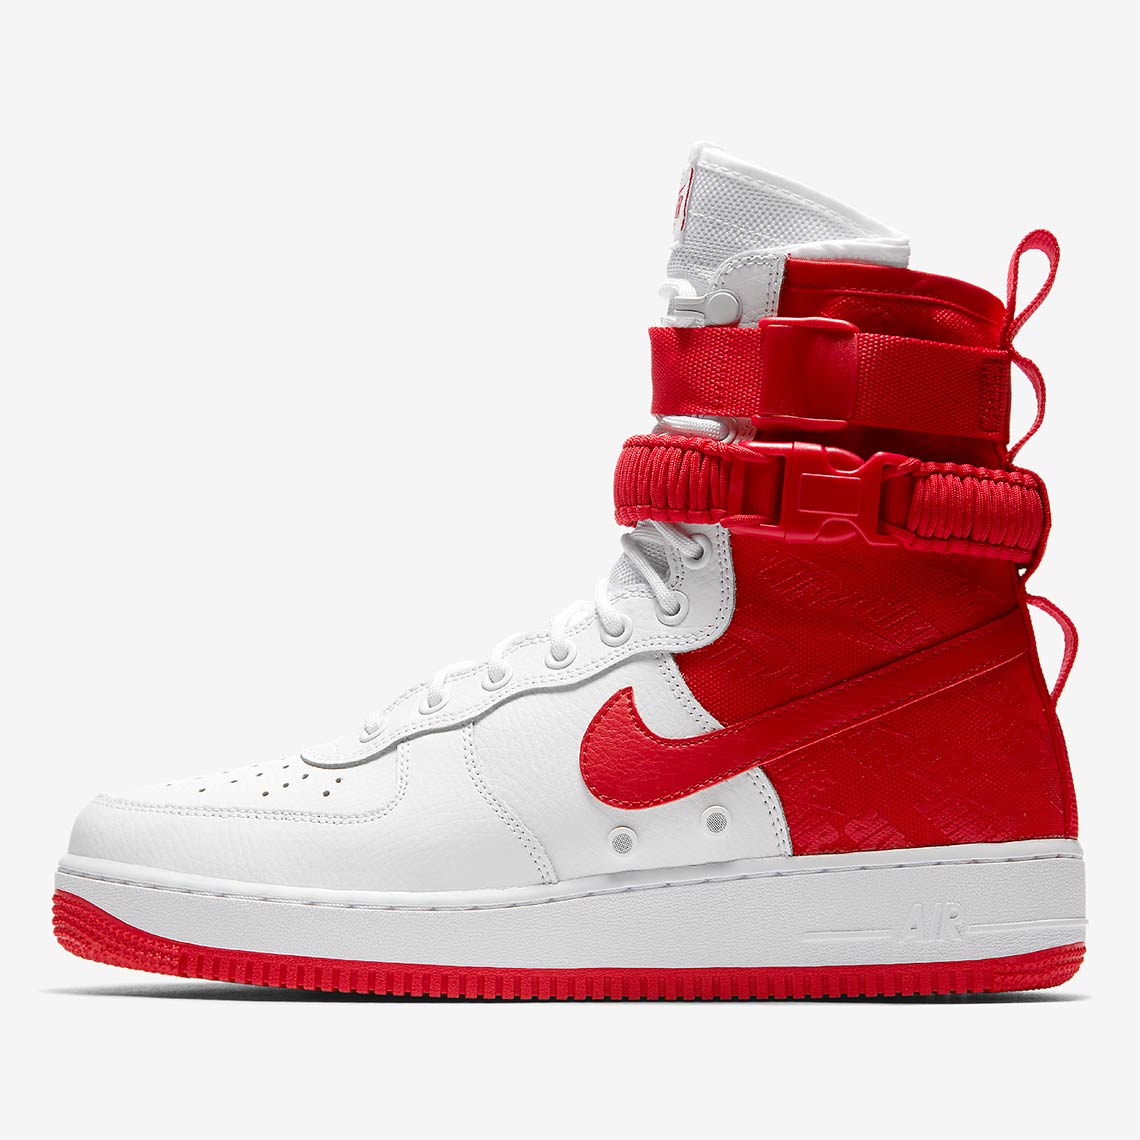 nike air force 1 sf red for sale e8598 